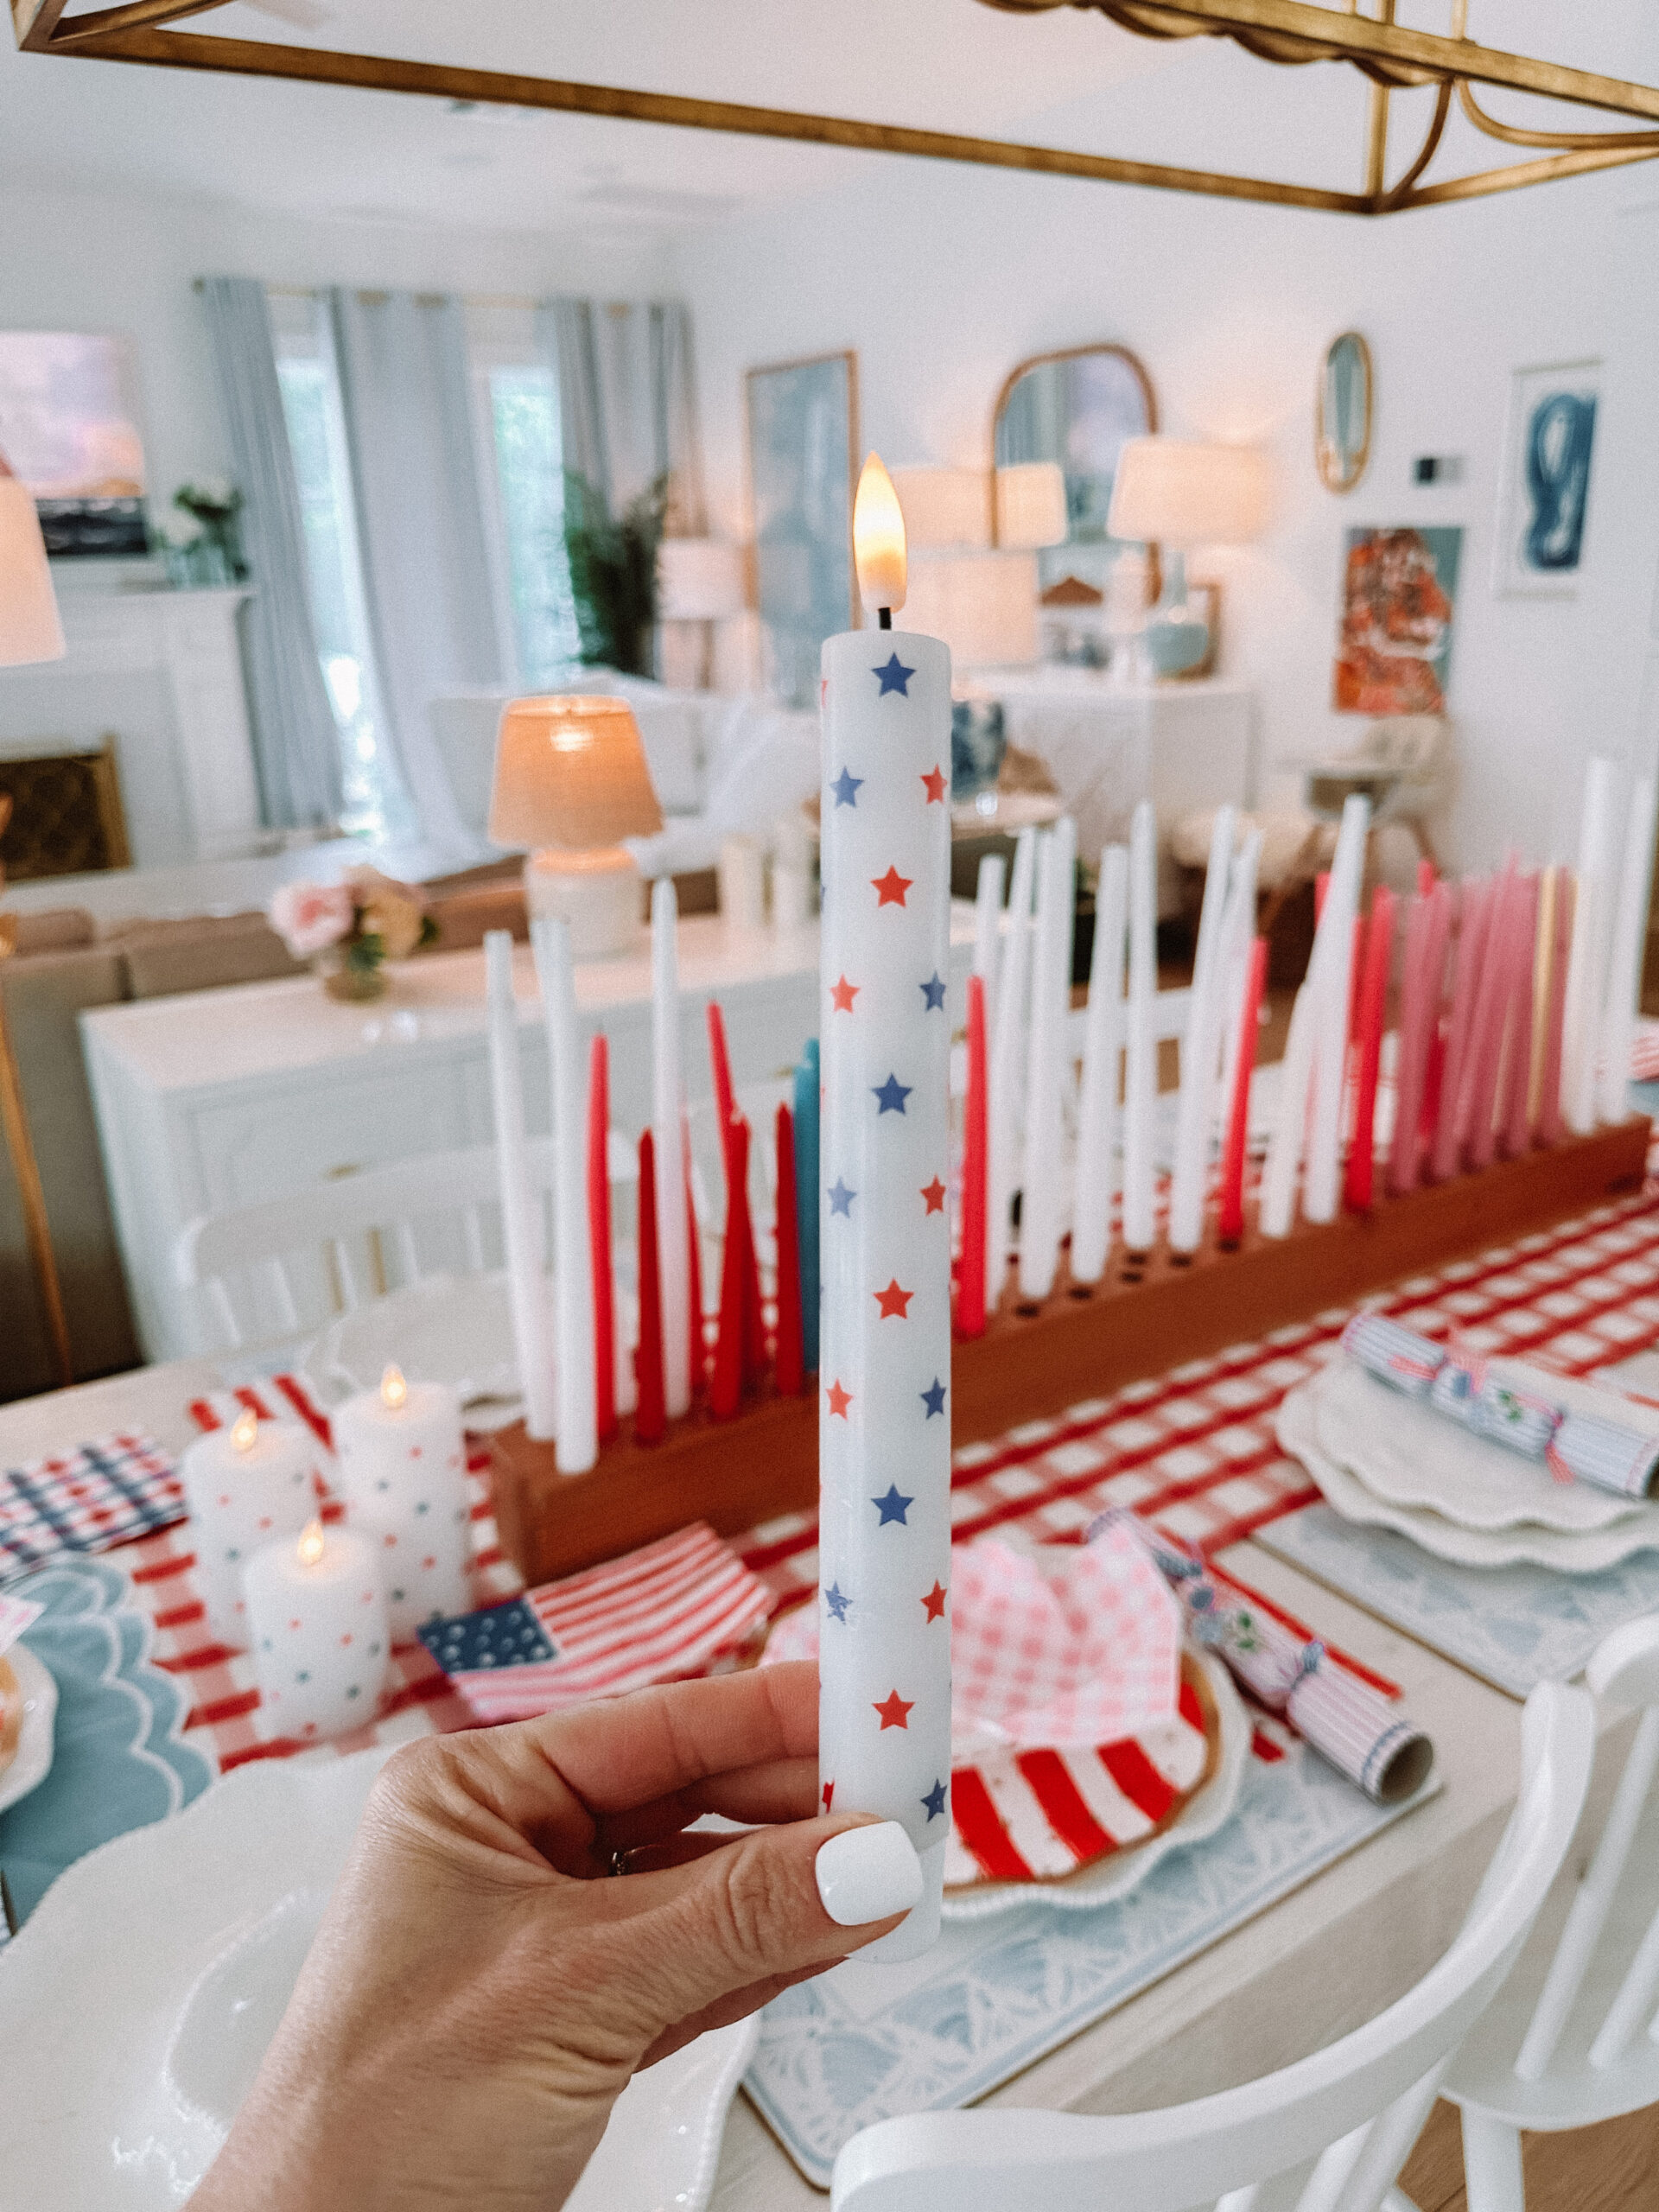 4th of july hosting 4th of july candles 4th of July Table Setting Red Gingham Table Runner Flag Plates Scalloped Plates Wood Candle Holder Star Candles Set Stanley Cup in Pool Patriotic Dinner Table Family 4th of July Celebration 4th of July Backyard Party